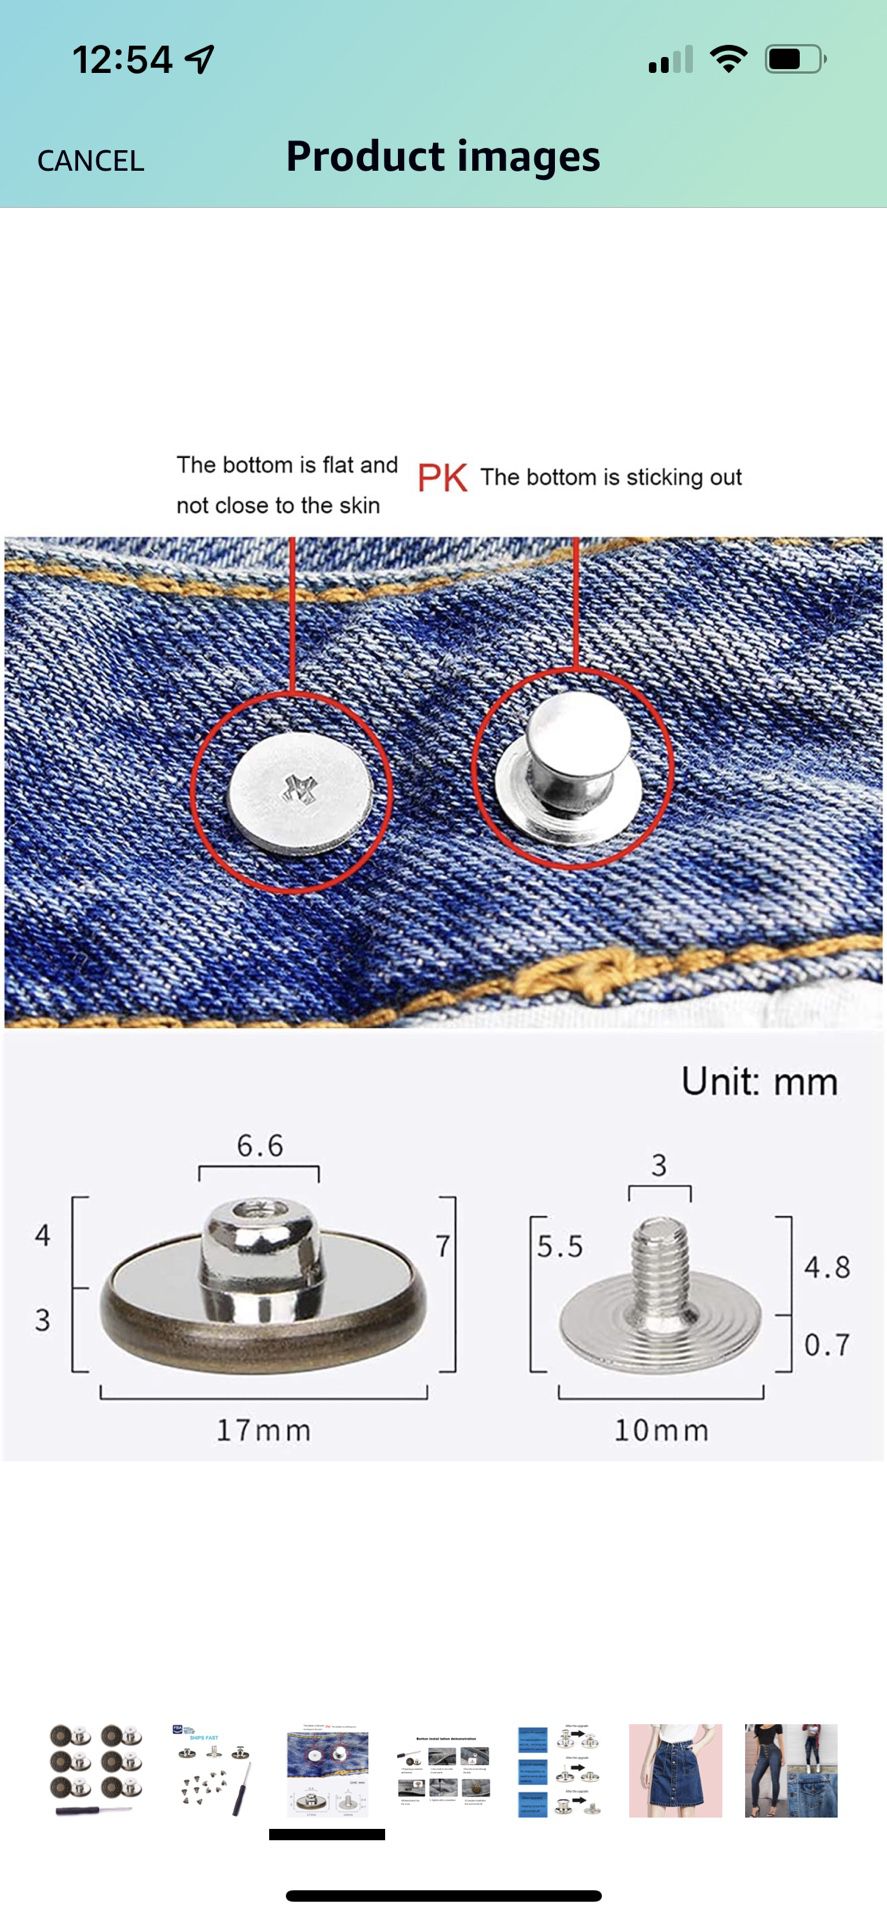 12 Pcs Button for Sewing Metal Jeans,ICEYLI 17 mm No-Sew Nailess Removable Metal Jeans Buttons Replacement